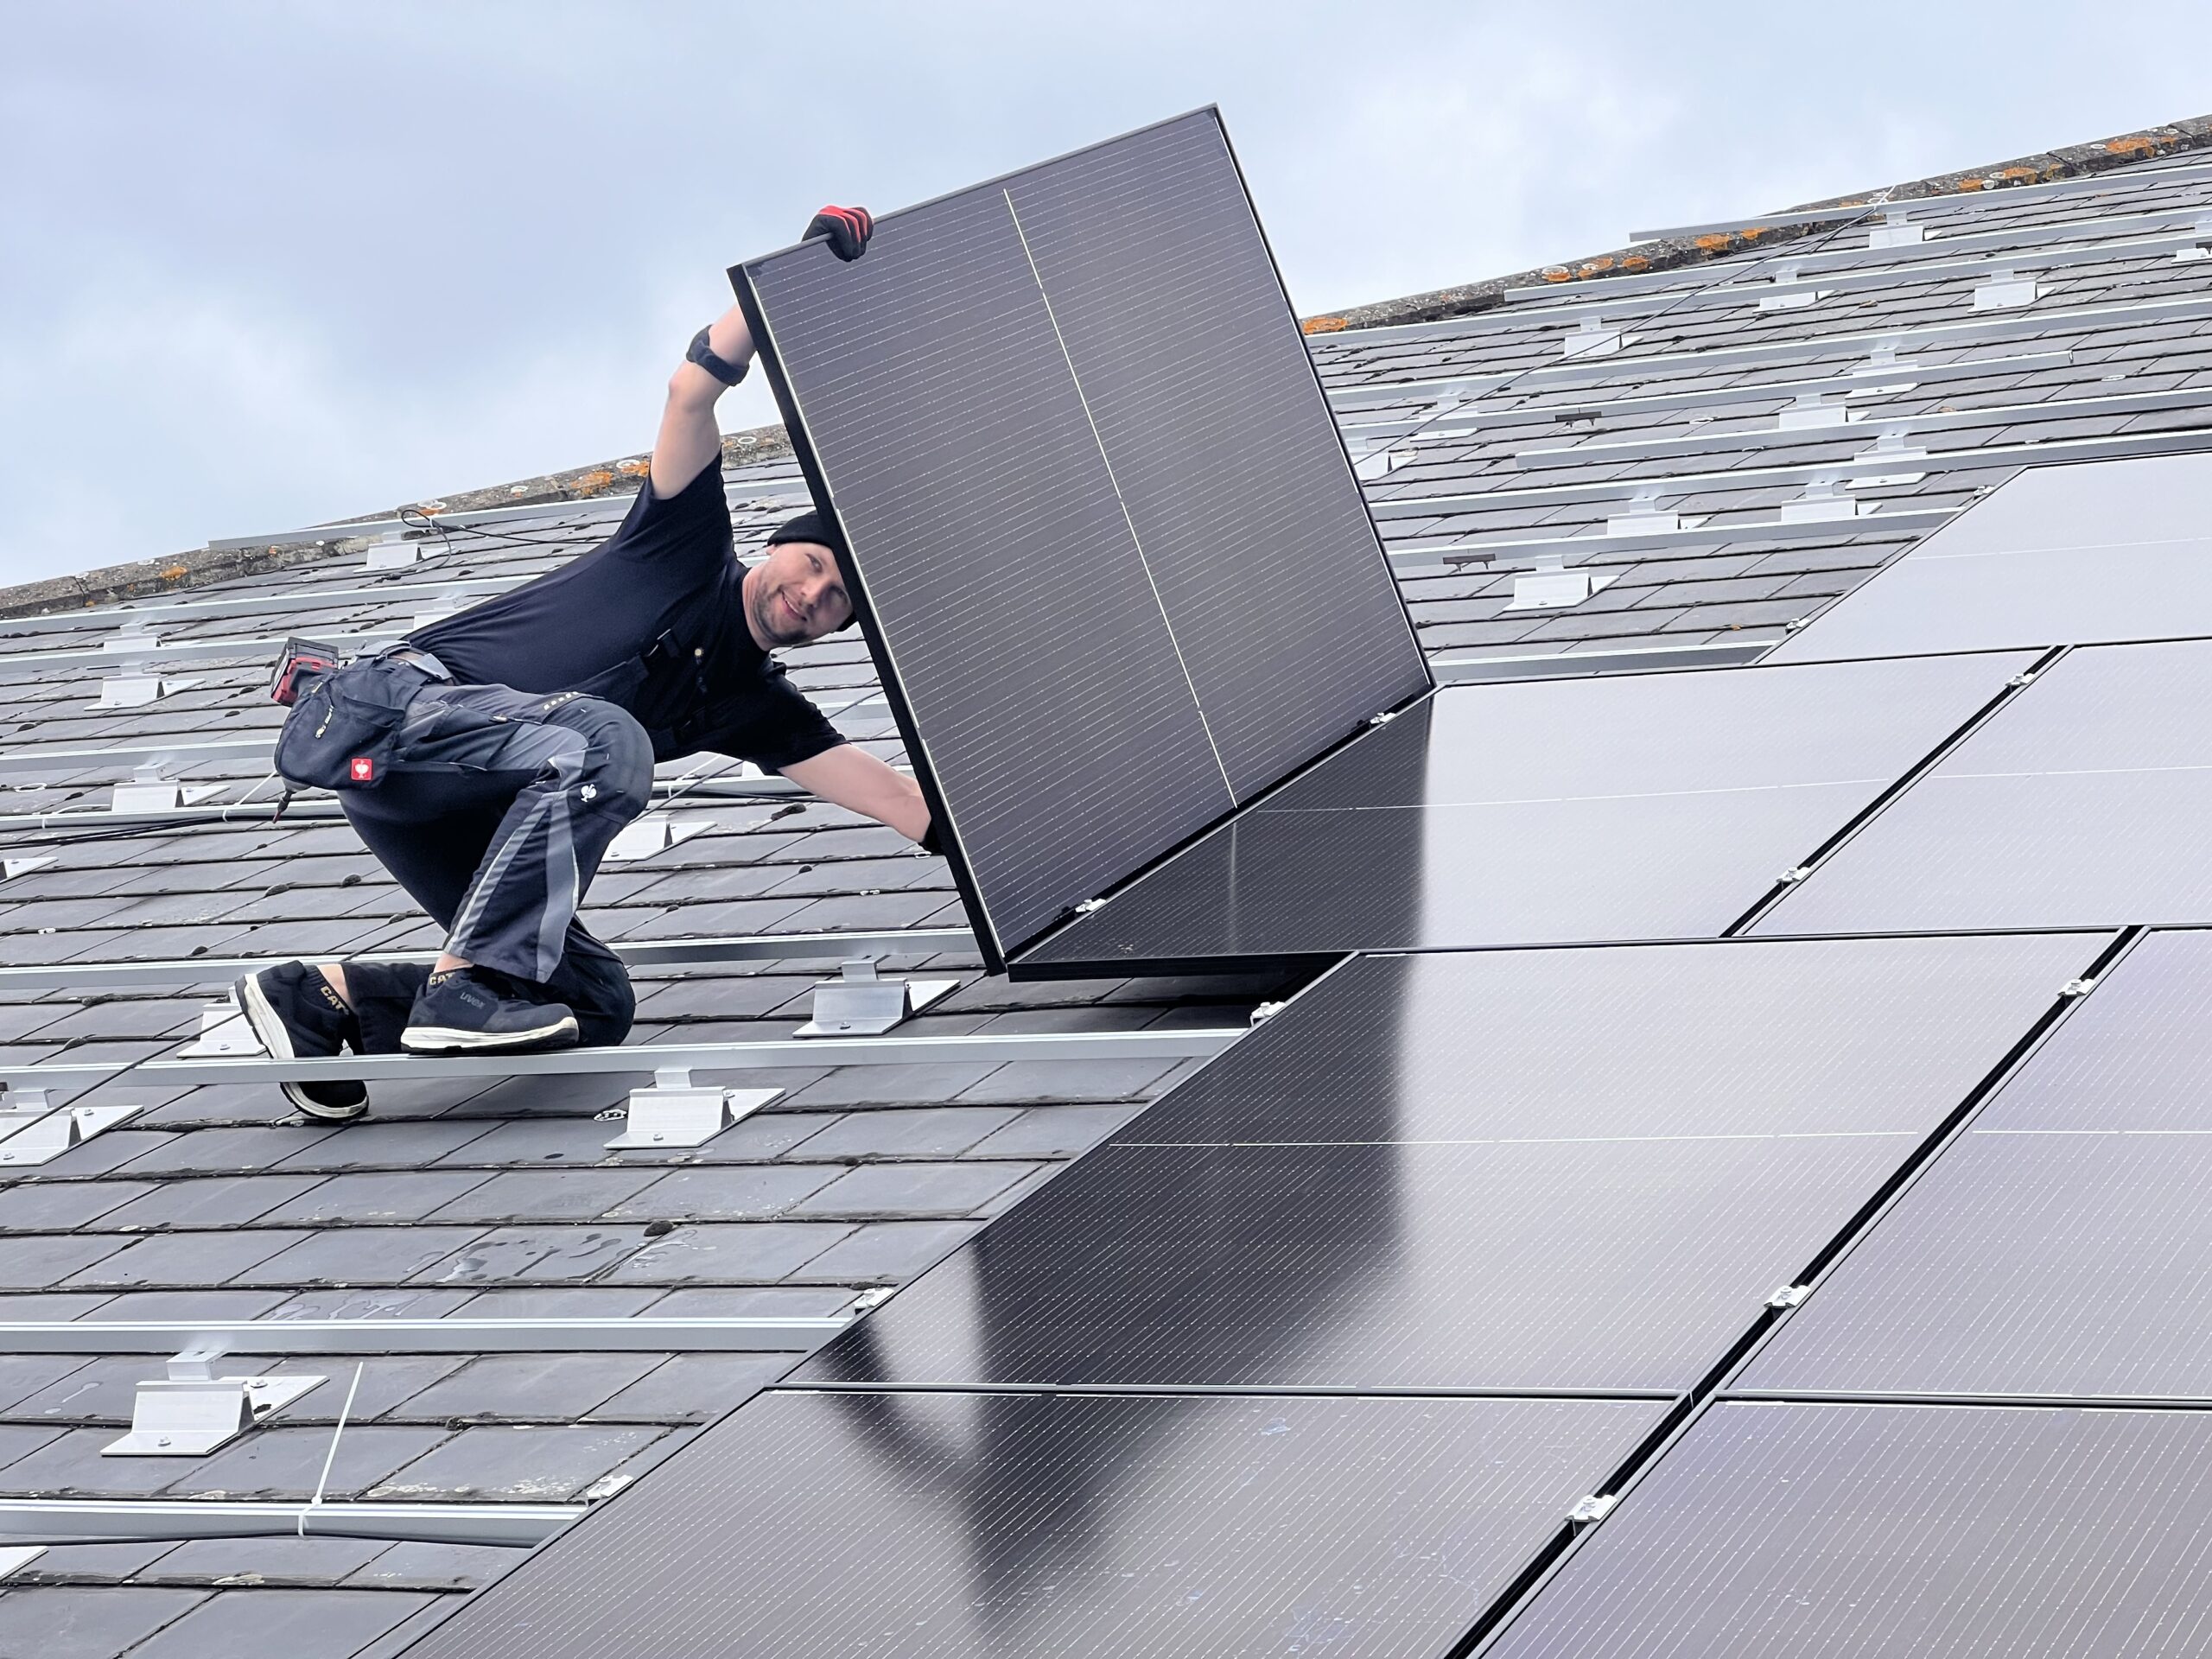 Solar panel installer fitting solar panels to a pitched roof